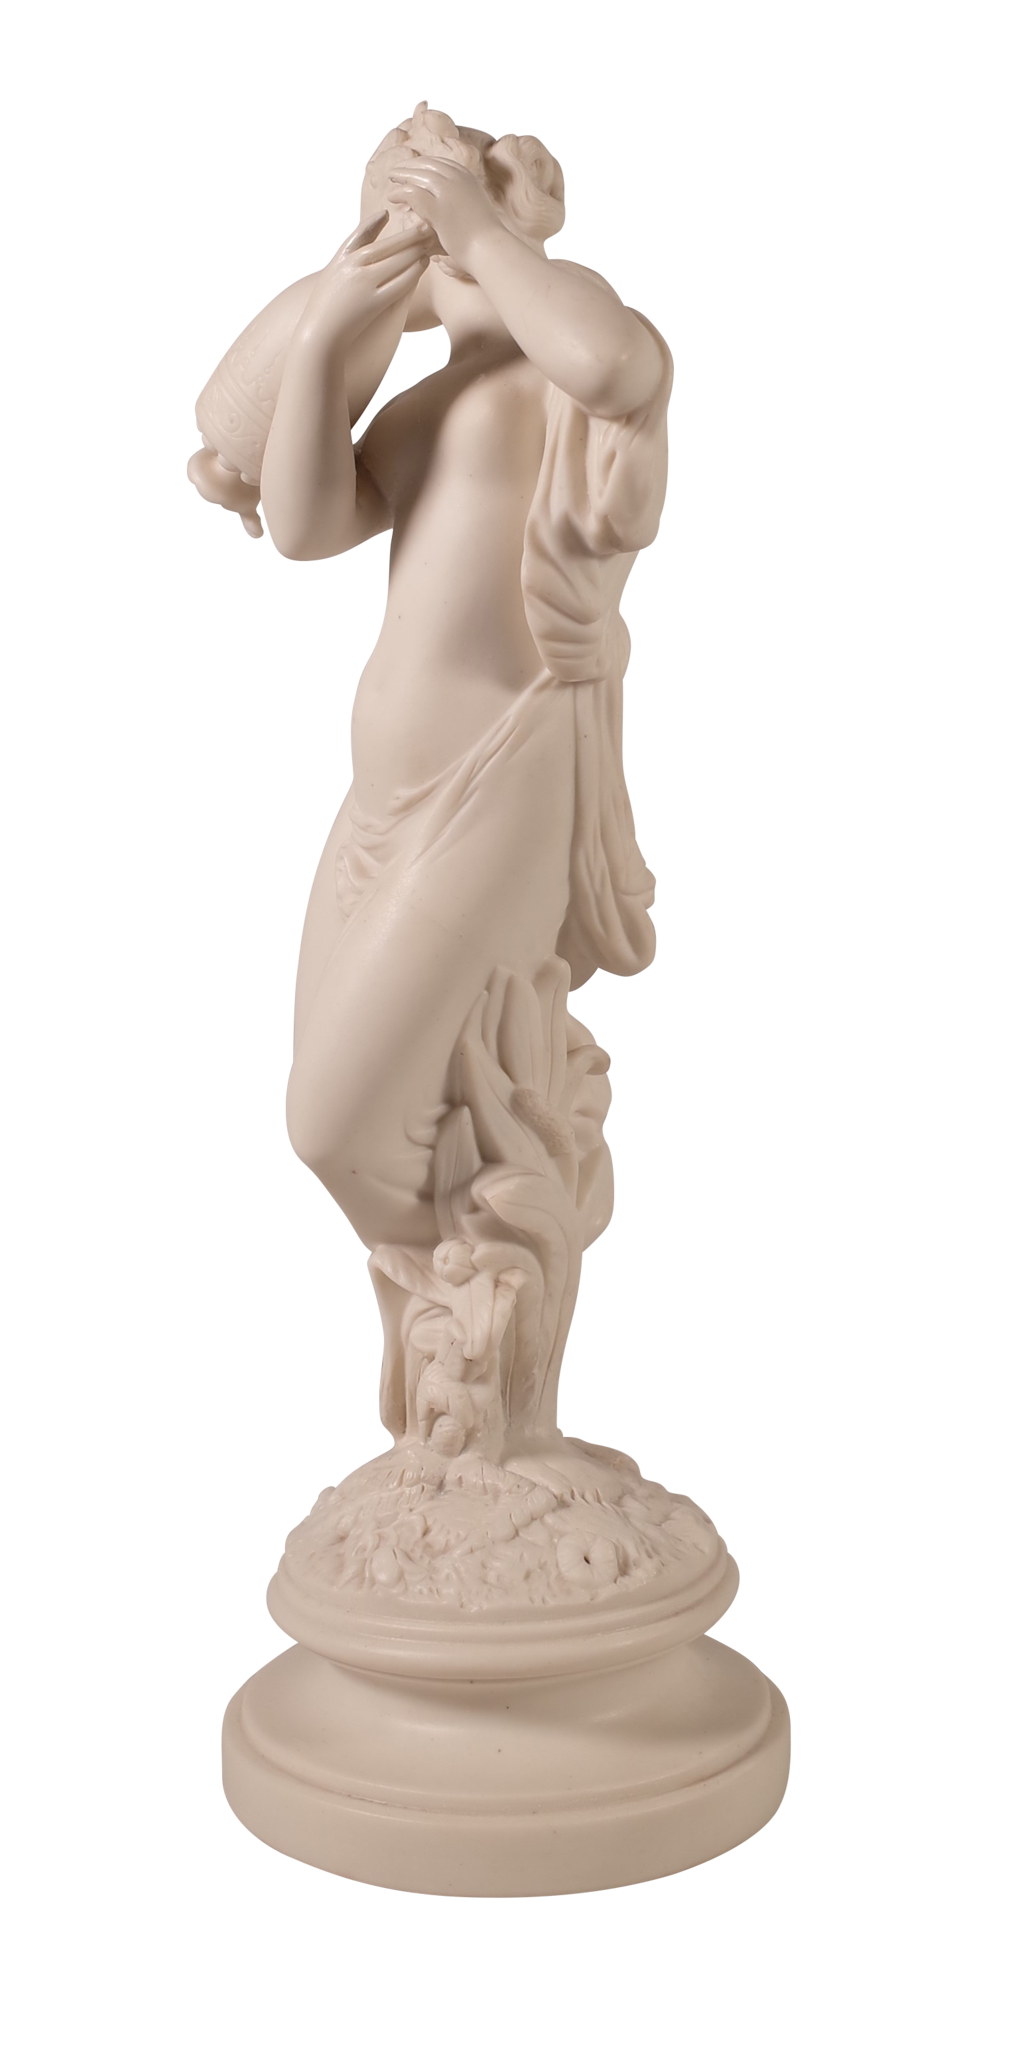 Parian Ware Figure of Woman with Grecian Urn